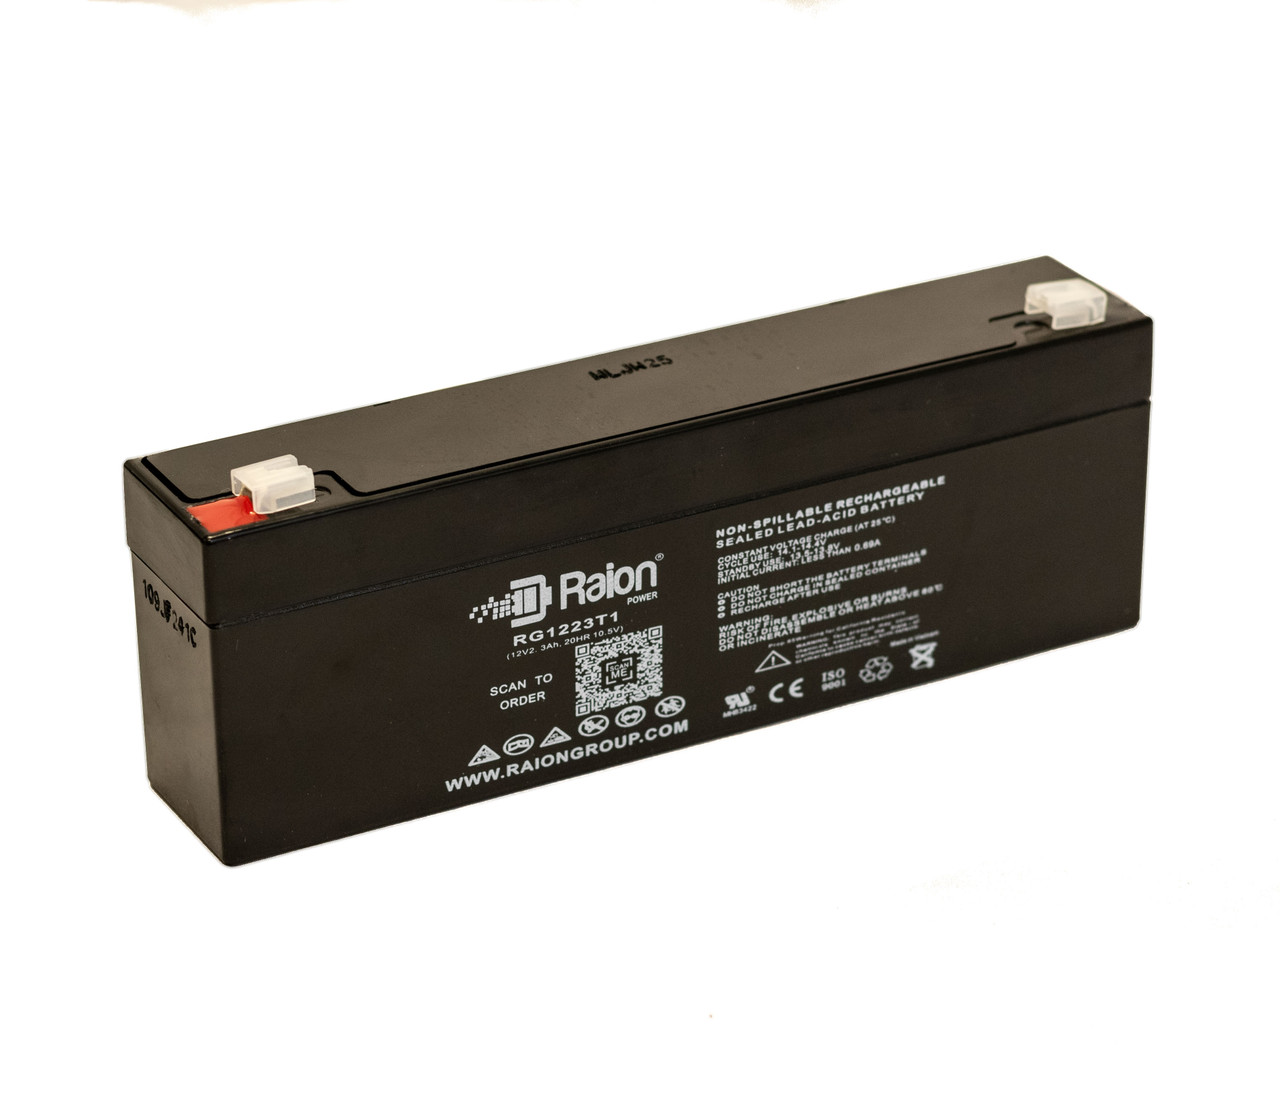 Raion Power RG1223T1 Replacement Battery for Power Star GB1219